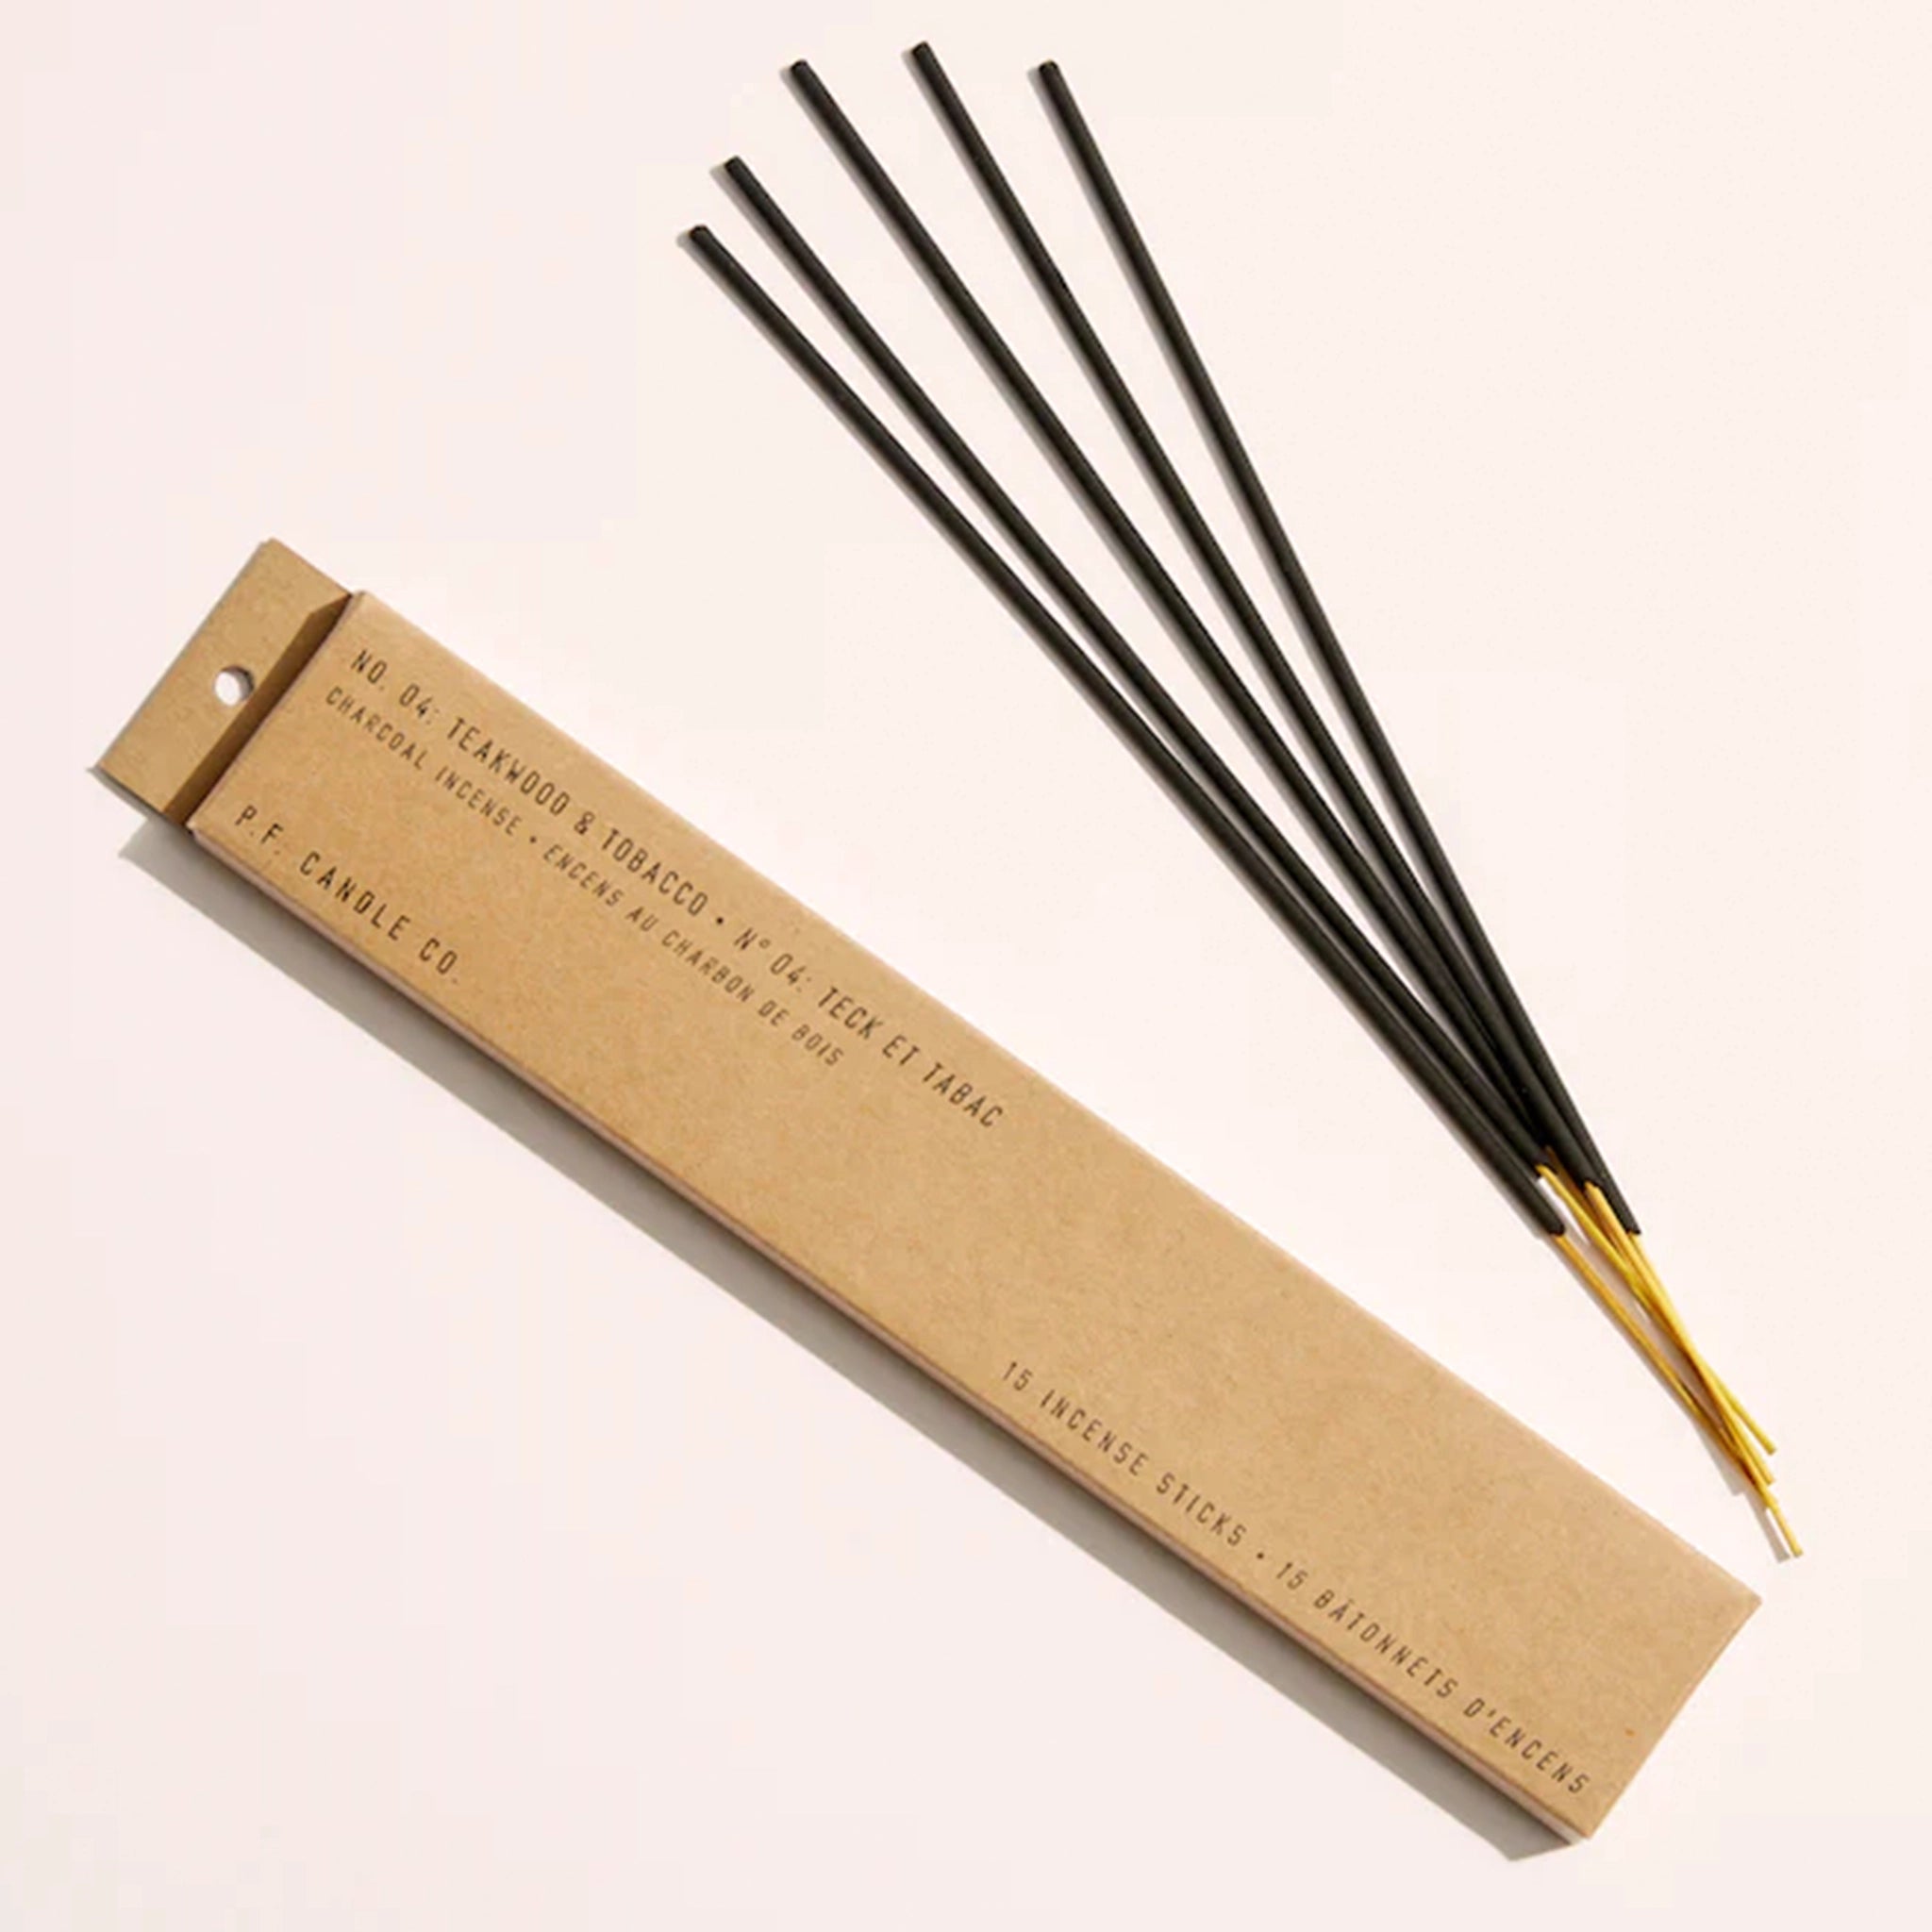 A cardboard package with 5 incense sticks with black ties and exposed natural wood ends along with black text on the box that reads, &quot;Teakwood &amp; Tobacco Incense&quot;.